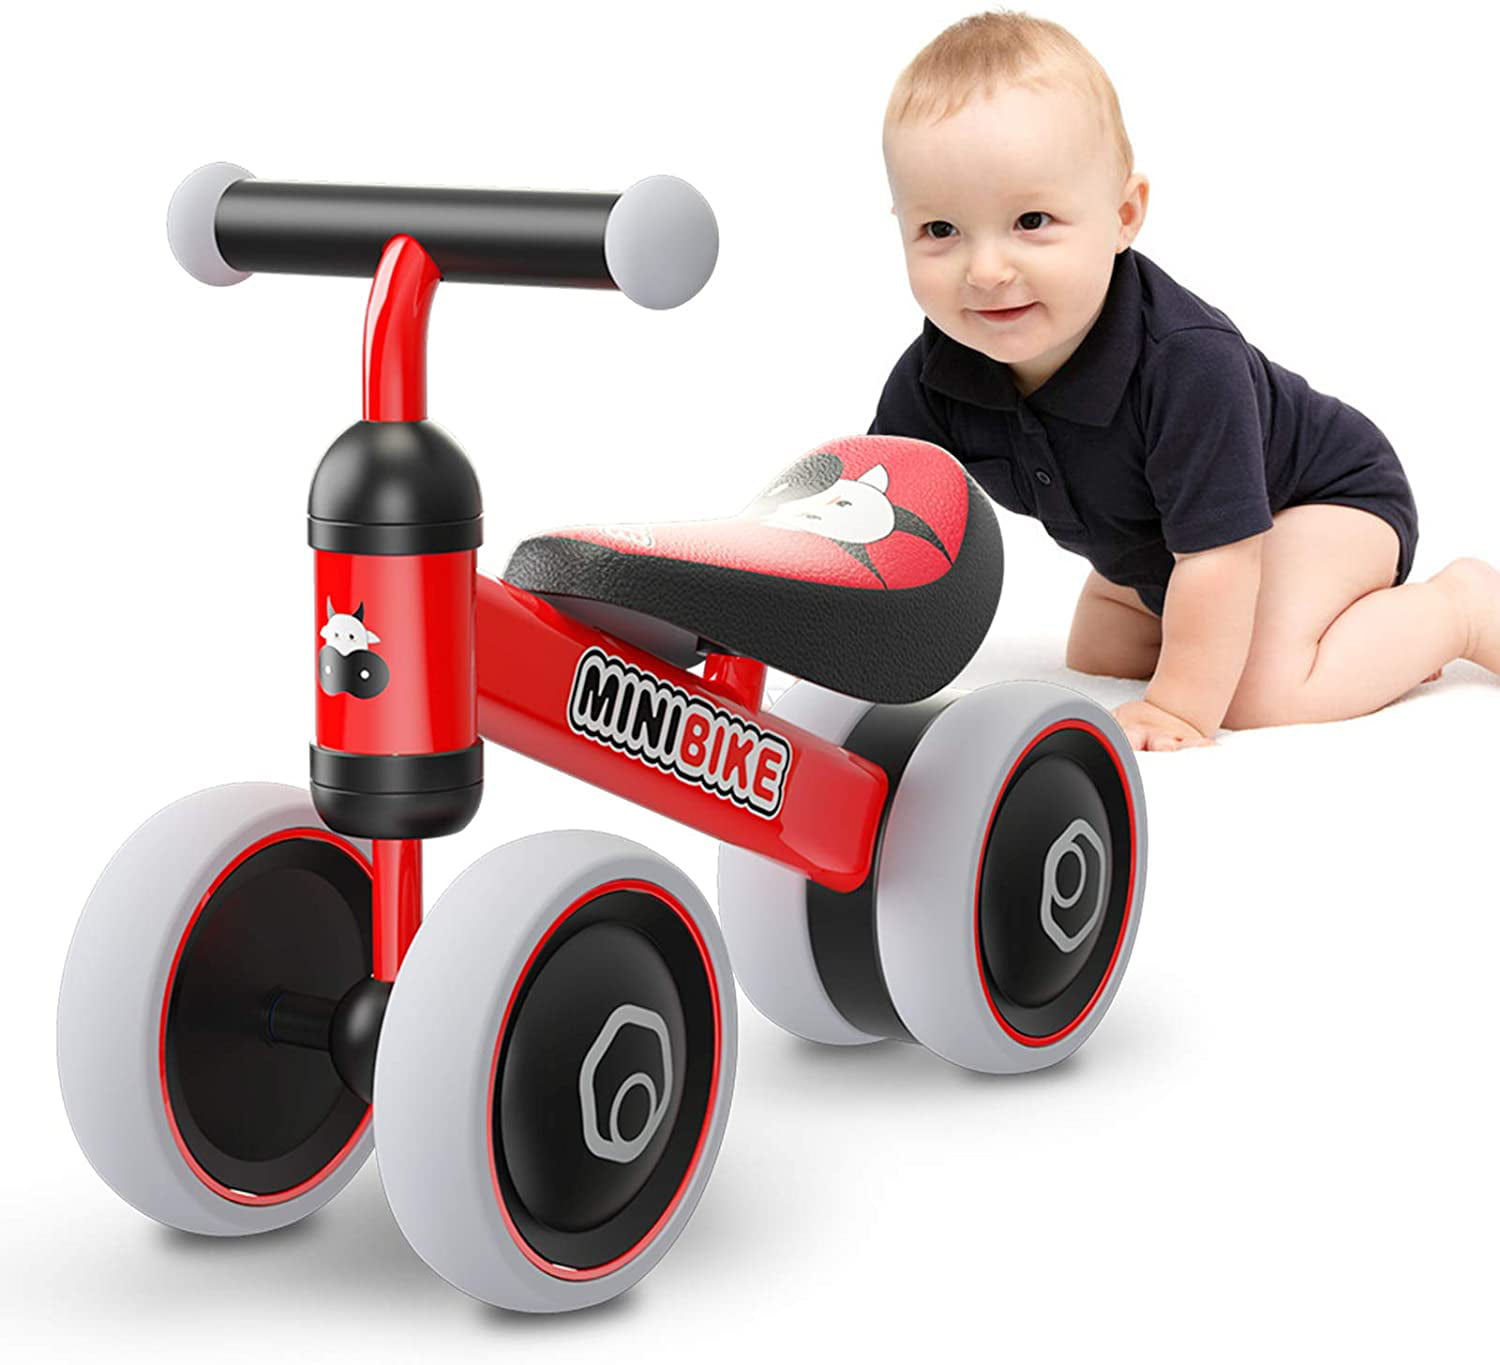 24 Toys for Year for sale online Ancaixin Balance Bikes Baby Bicycle Children Walker 10 Month 